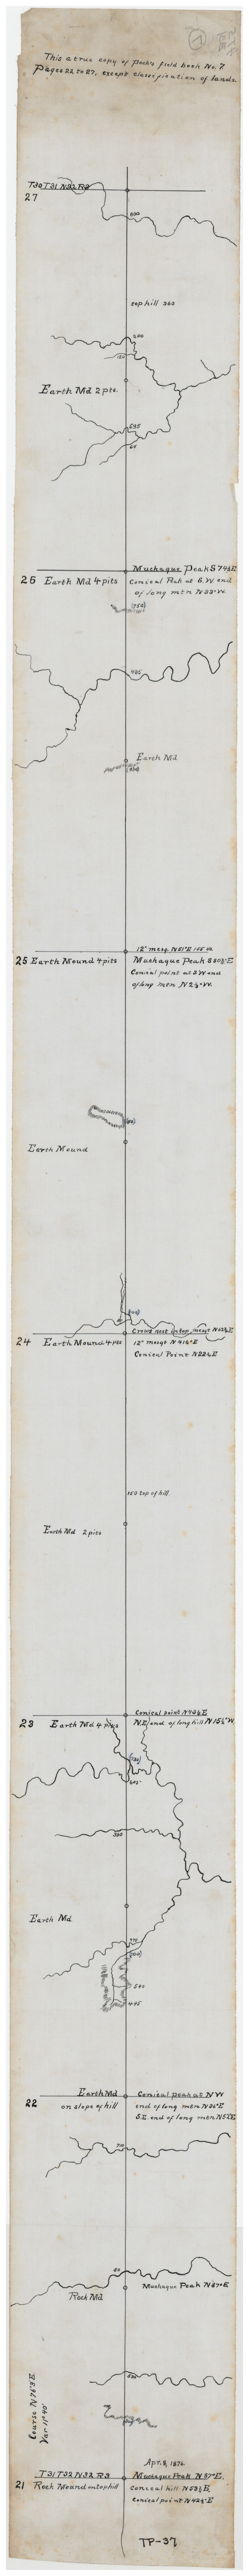 89726, This is a true copy of Peck's field book No. 7 pages 22 to 27, except classification of lands, Twichell Survey Records